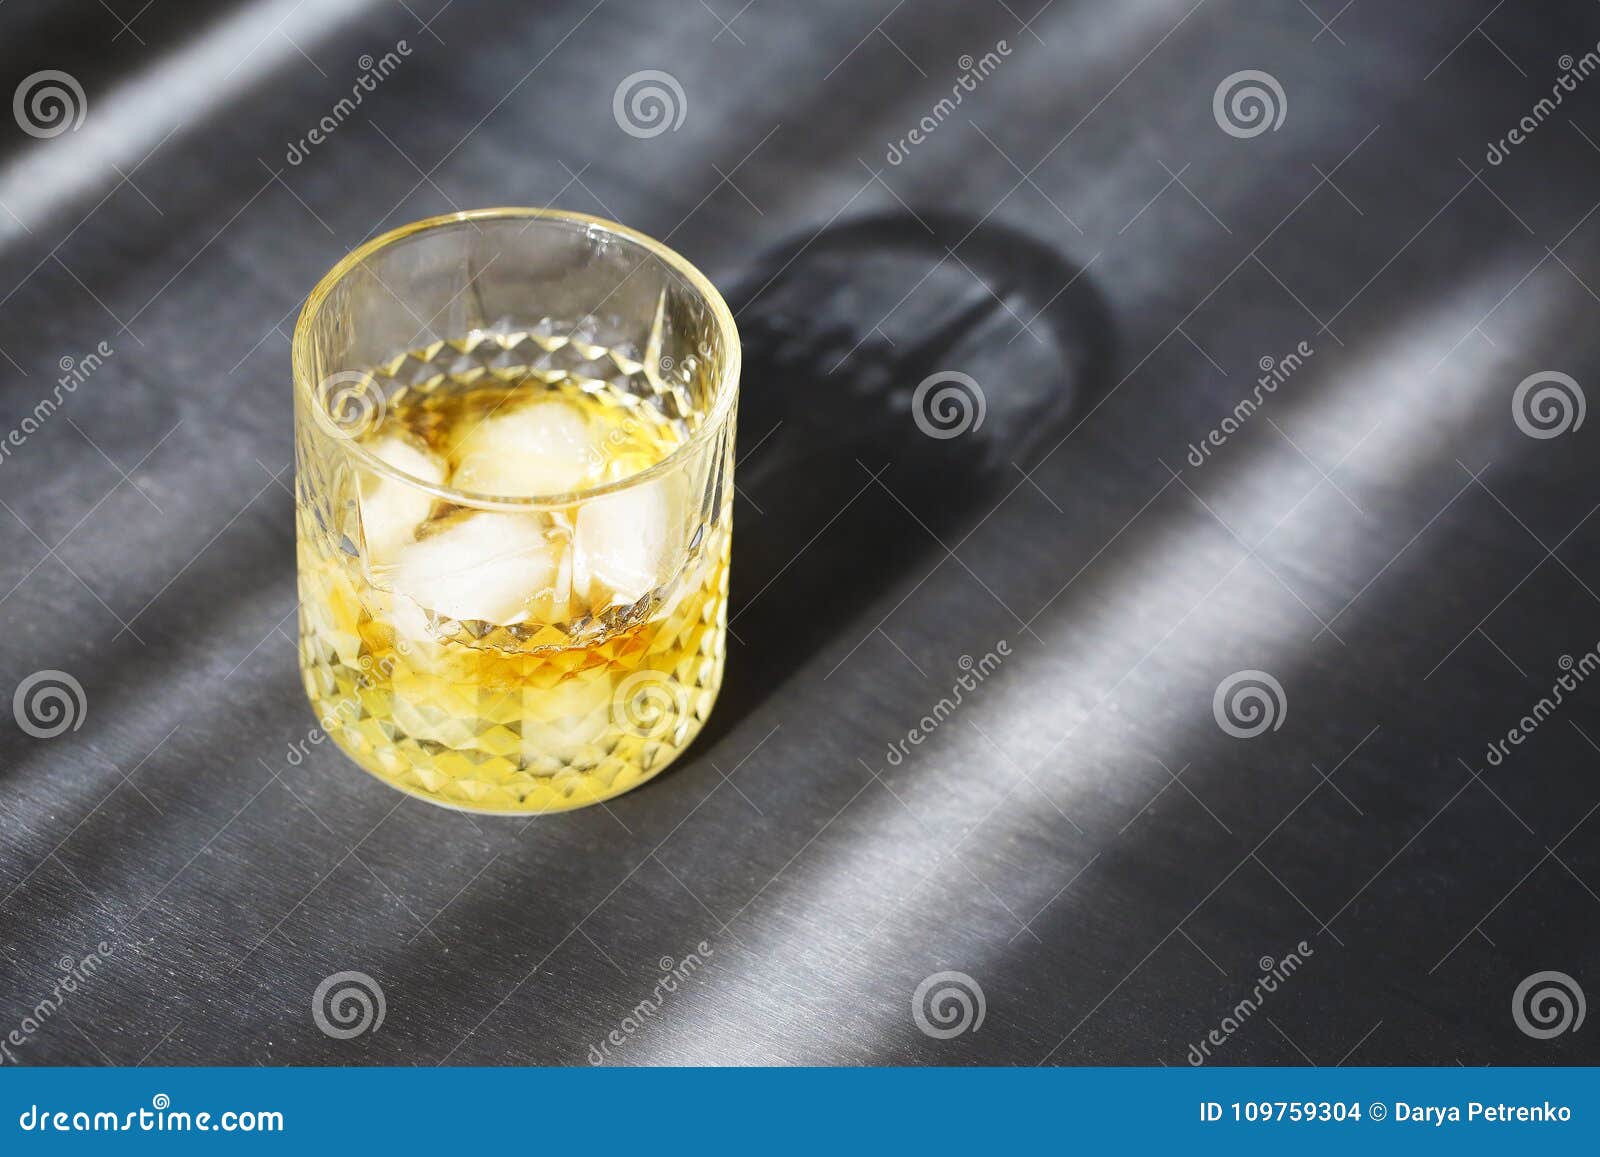 glass of whiskey on dark background. close up